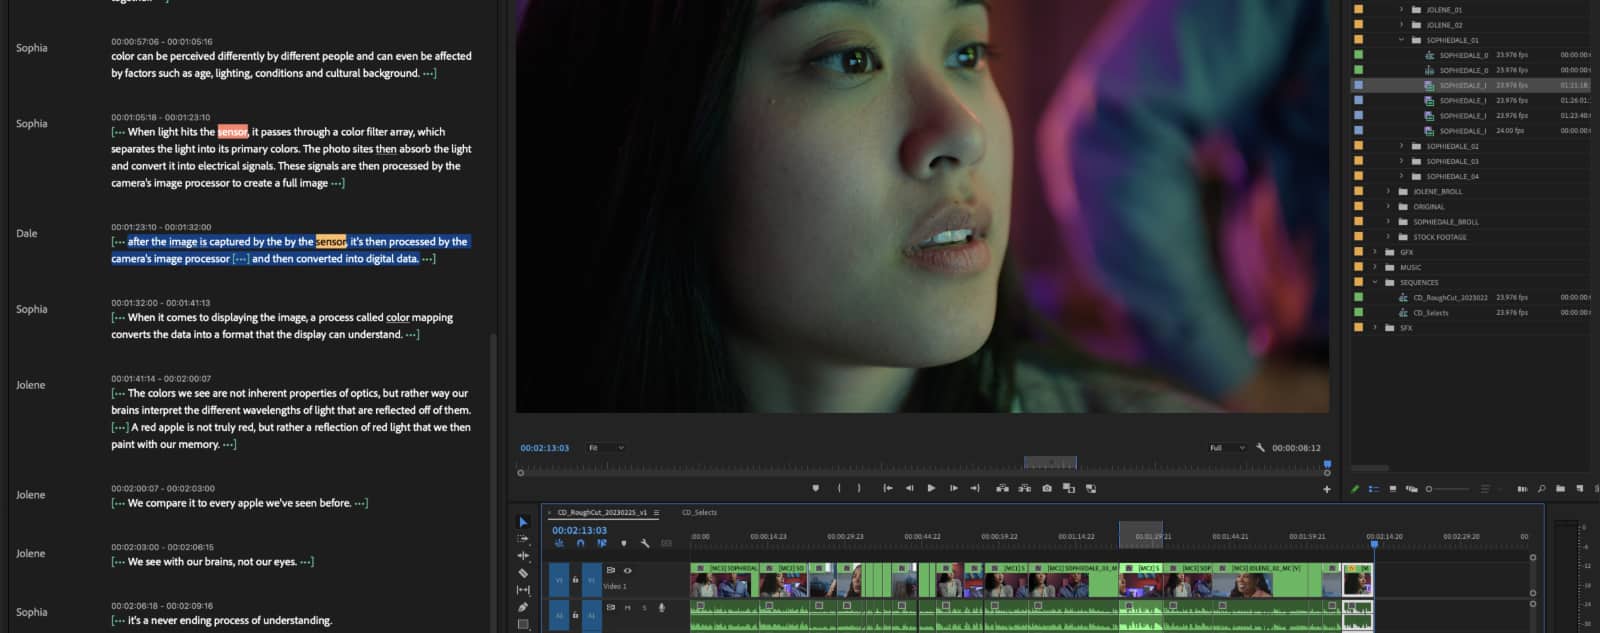 Adobe Premiere Pro Text-based editing